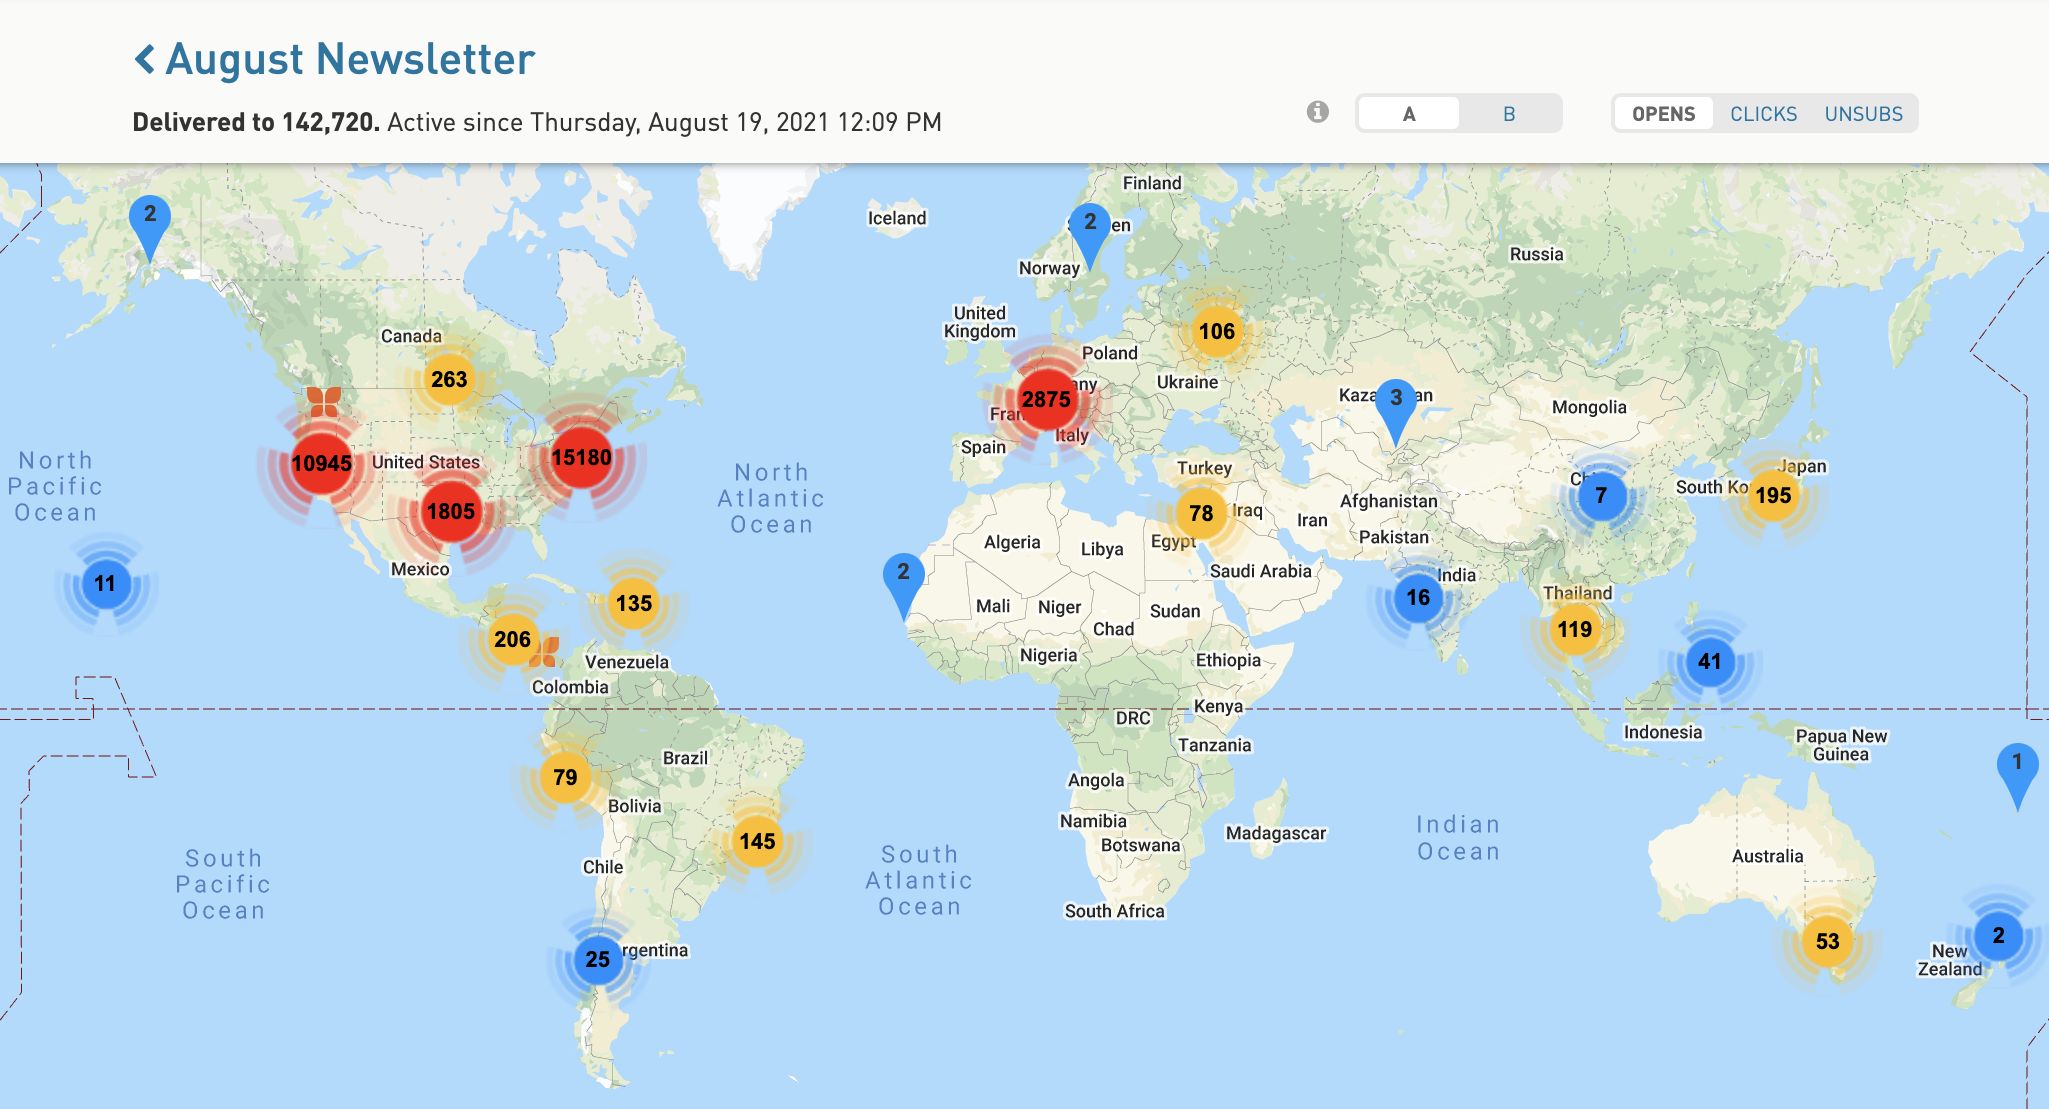 Screenshot of geolocation map with high concentrations of events in Europe, New York, Texas, and California